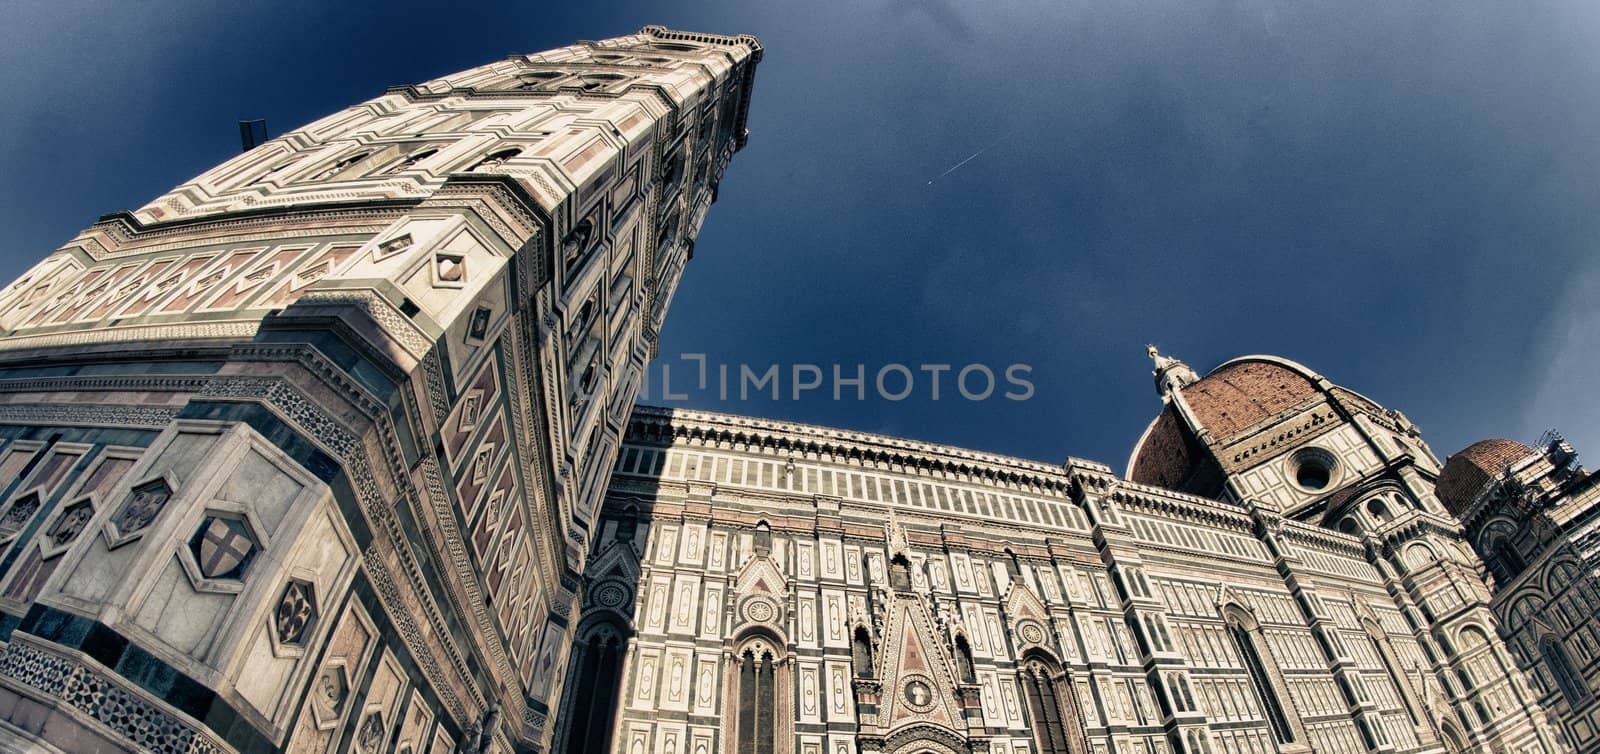 Architectural detail of Piazza del Duomo in Florence, Italy